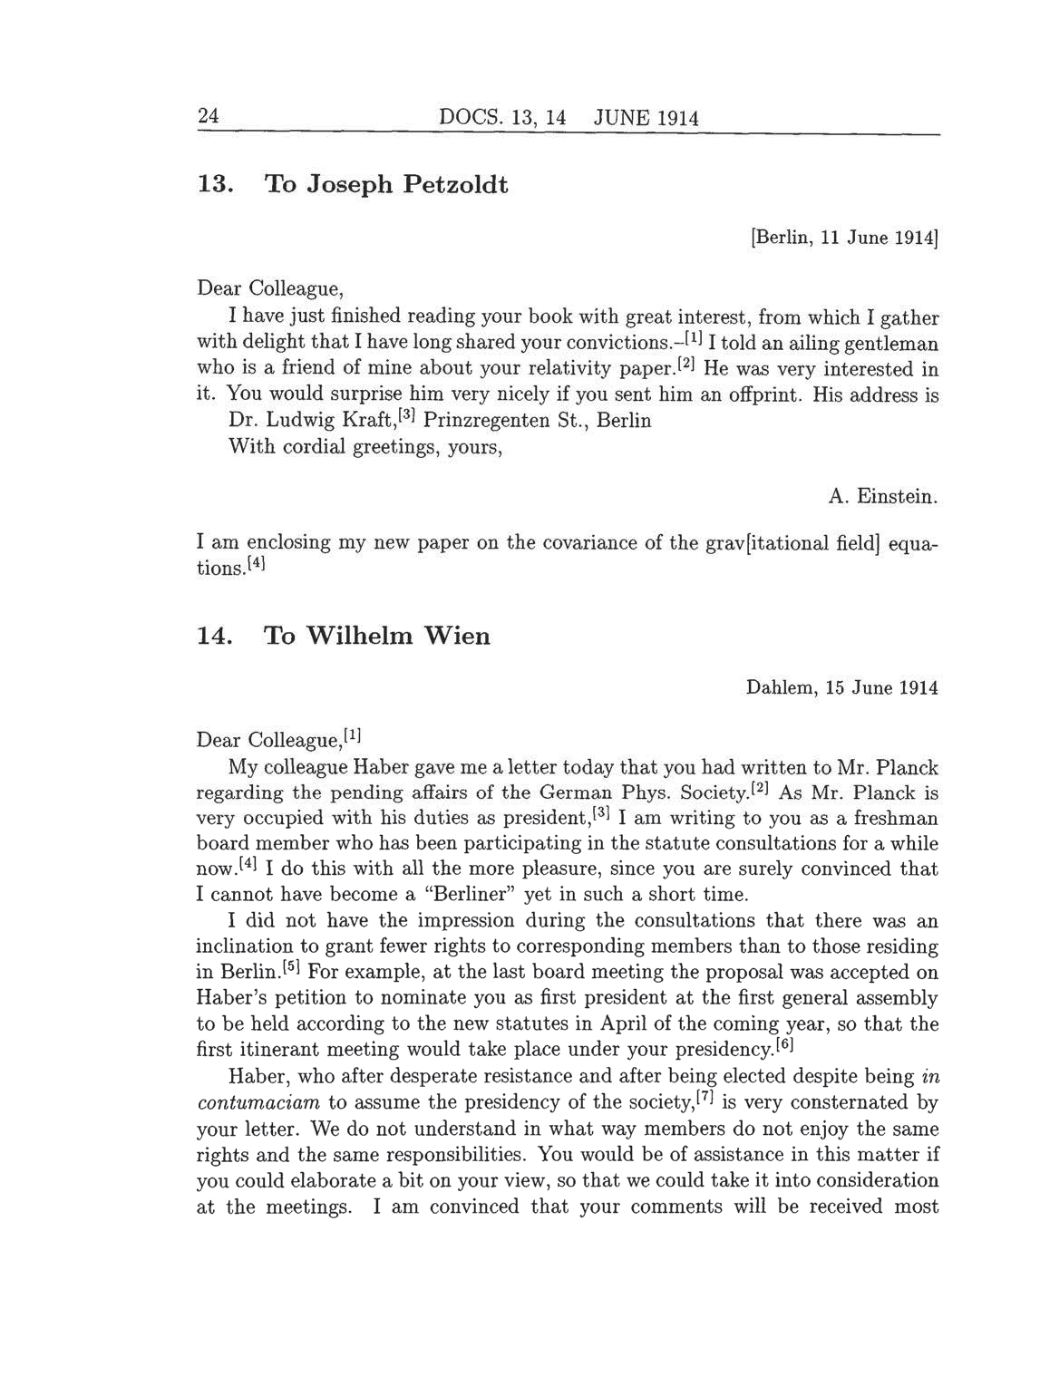 Volume 8: The Berlin Years: Correspondence, 1914-1918 (English translation supplement) page 24